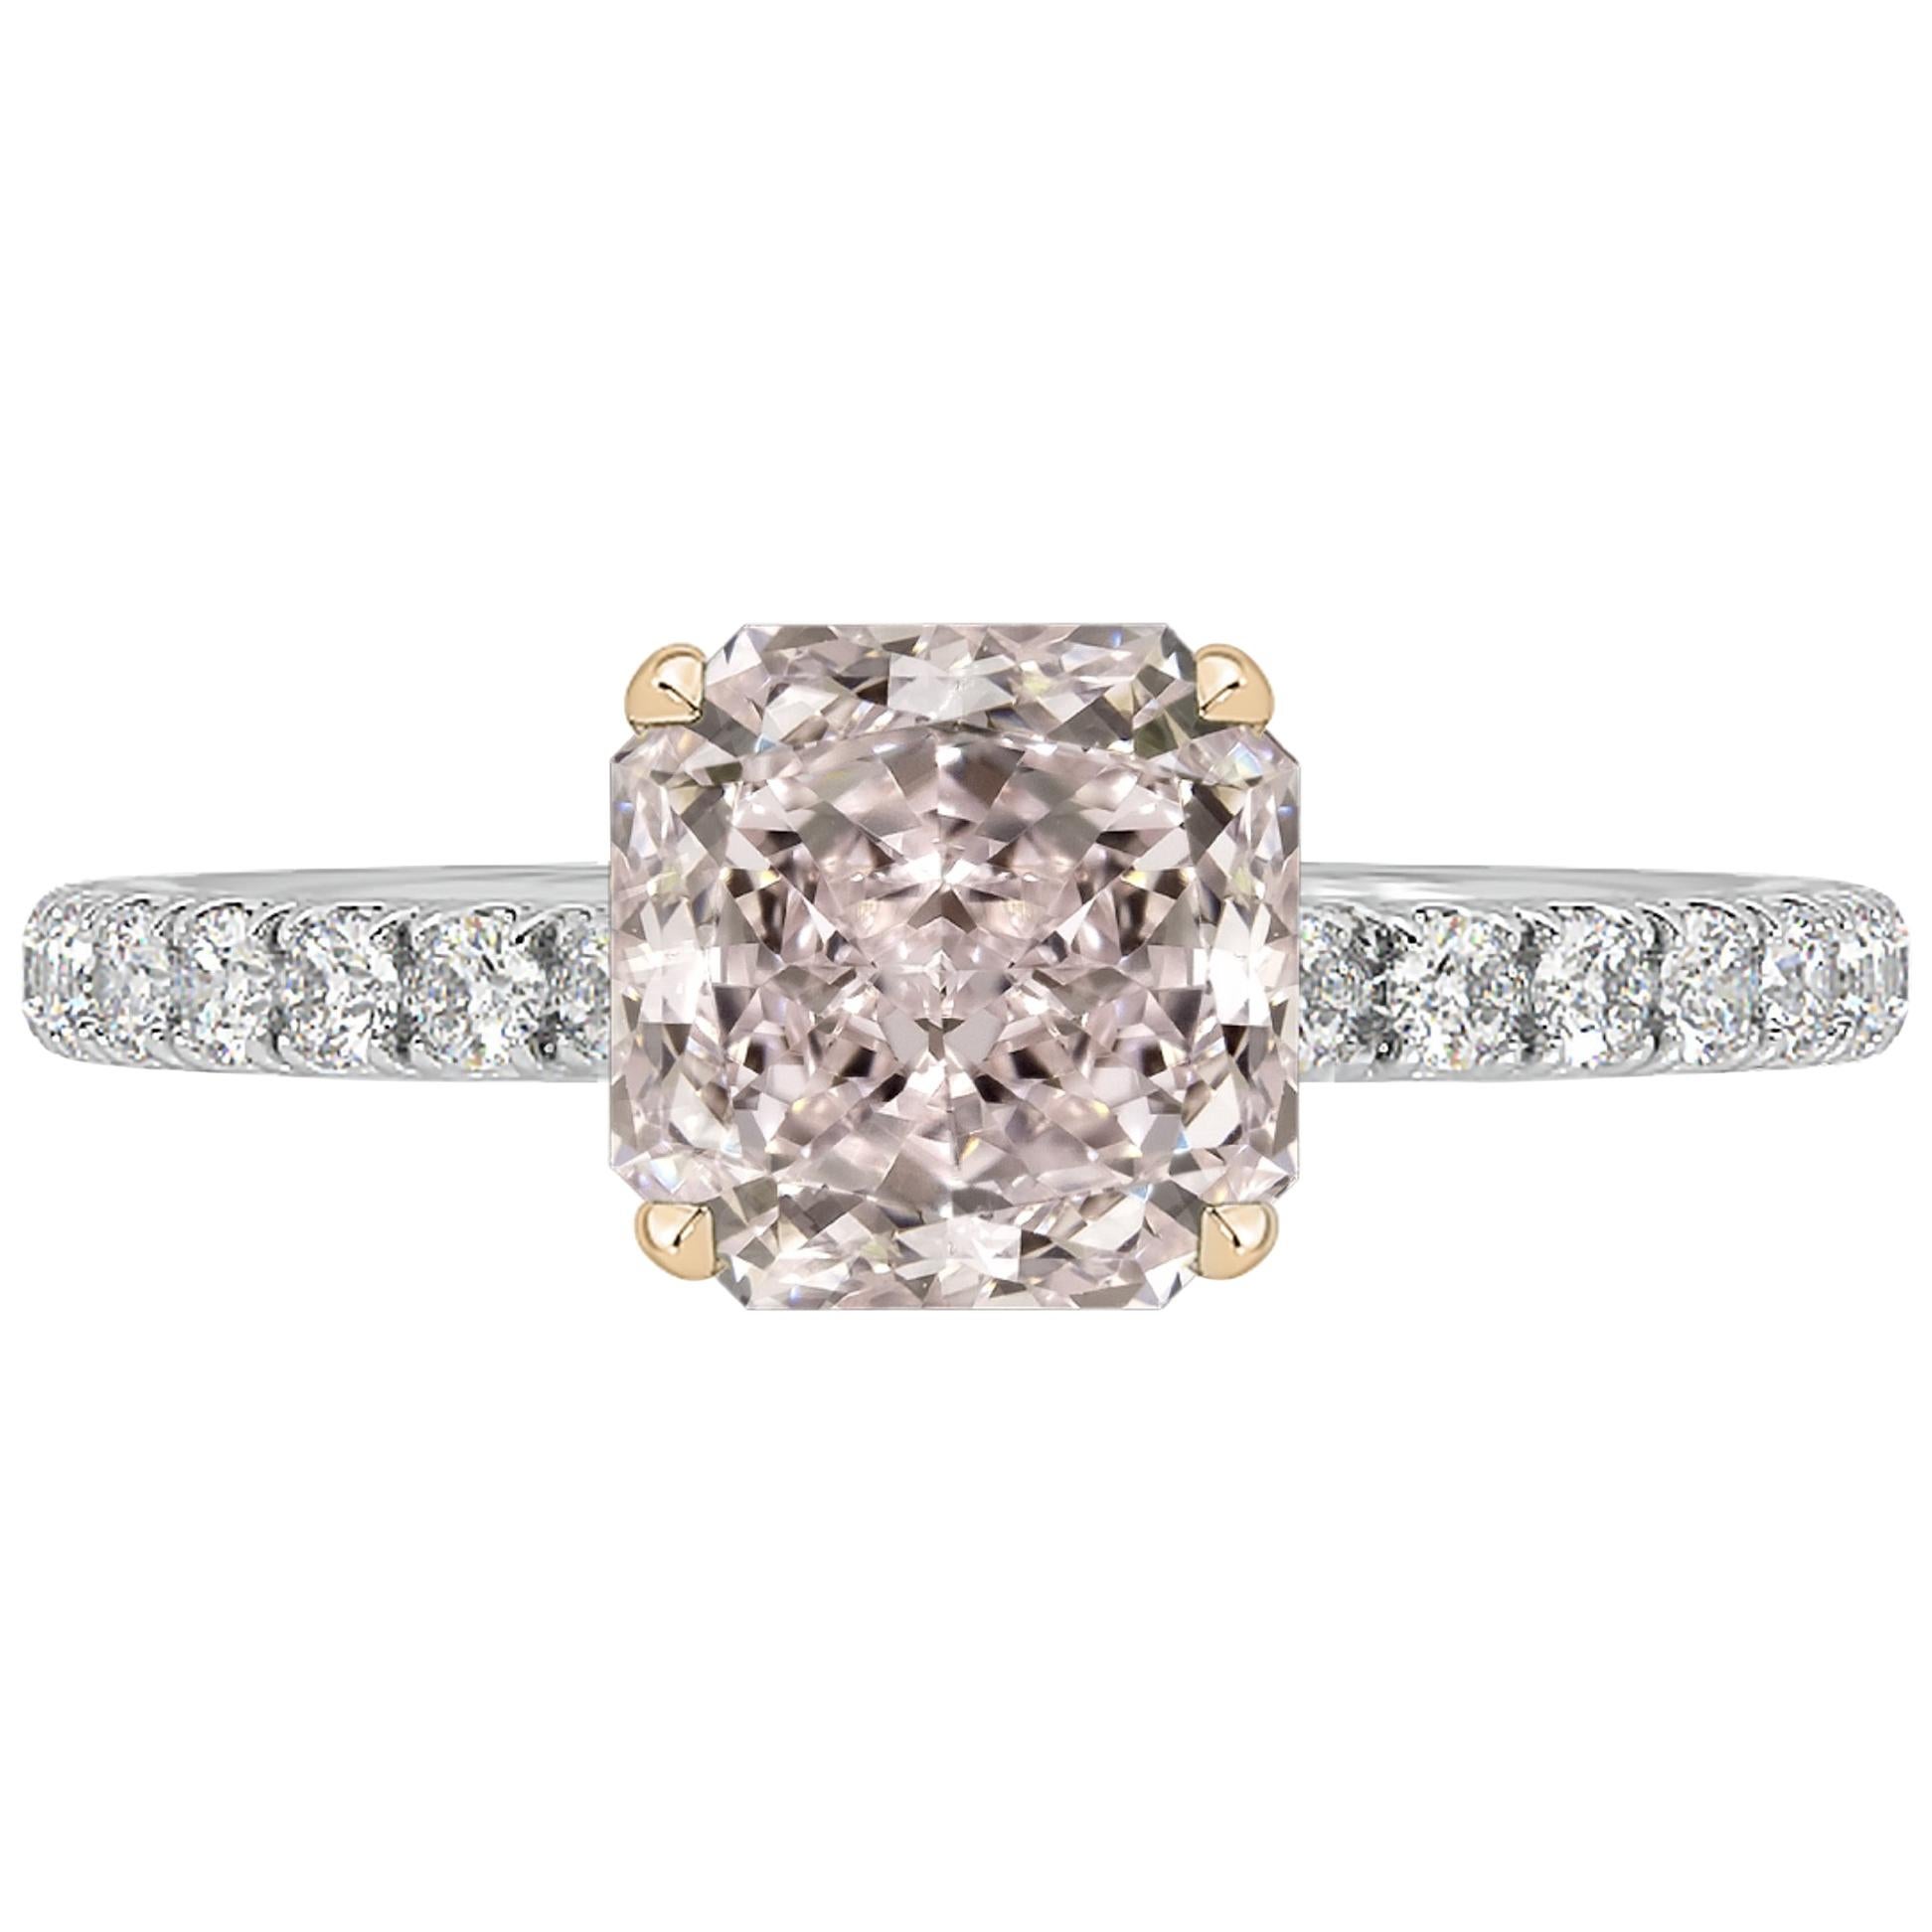 GIA Certified 0.56 Carat Radiant Cut Pink Diamond Ring For Sale